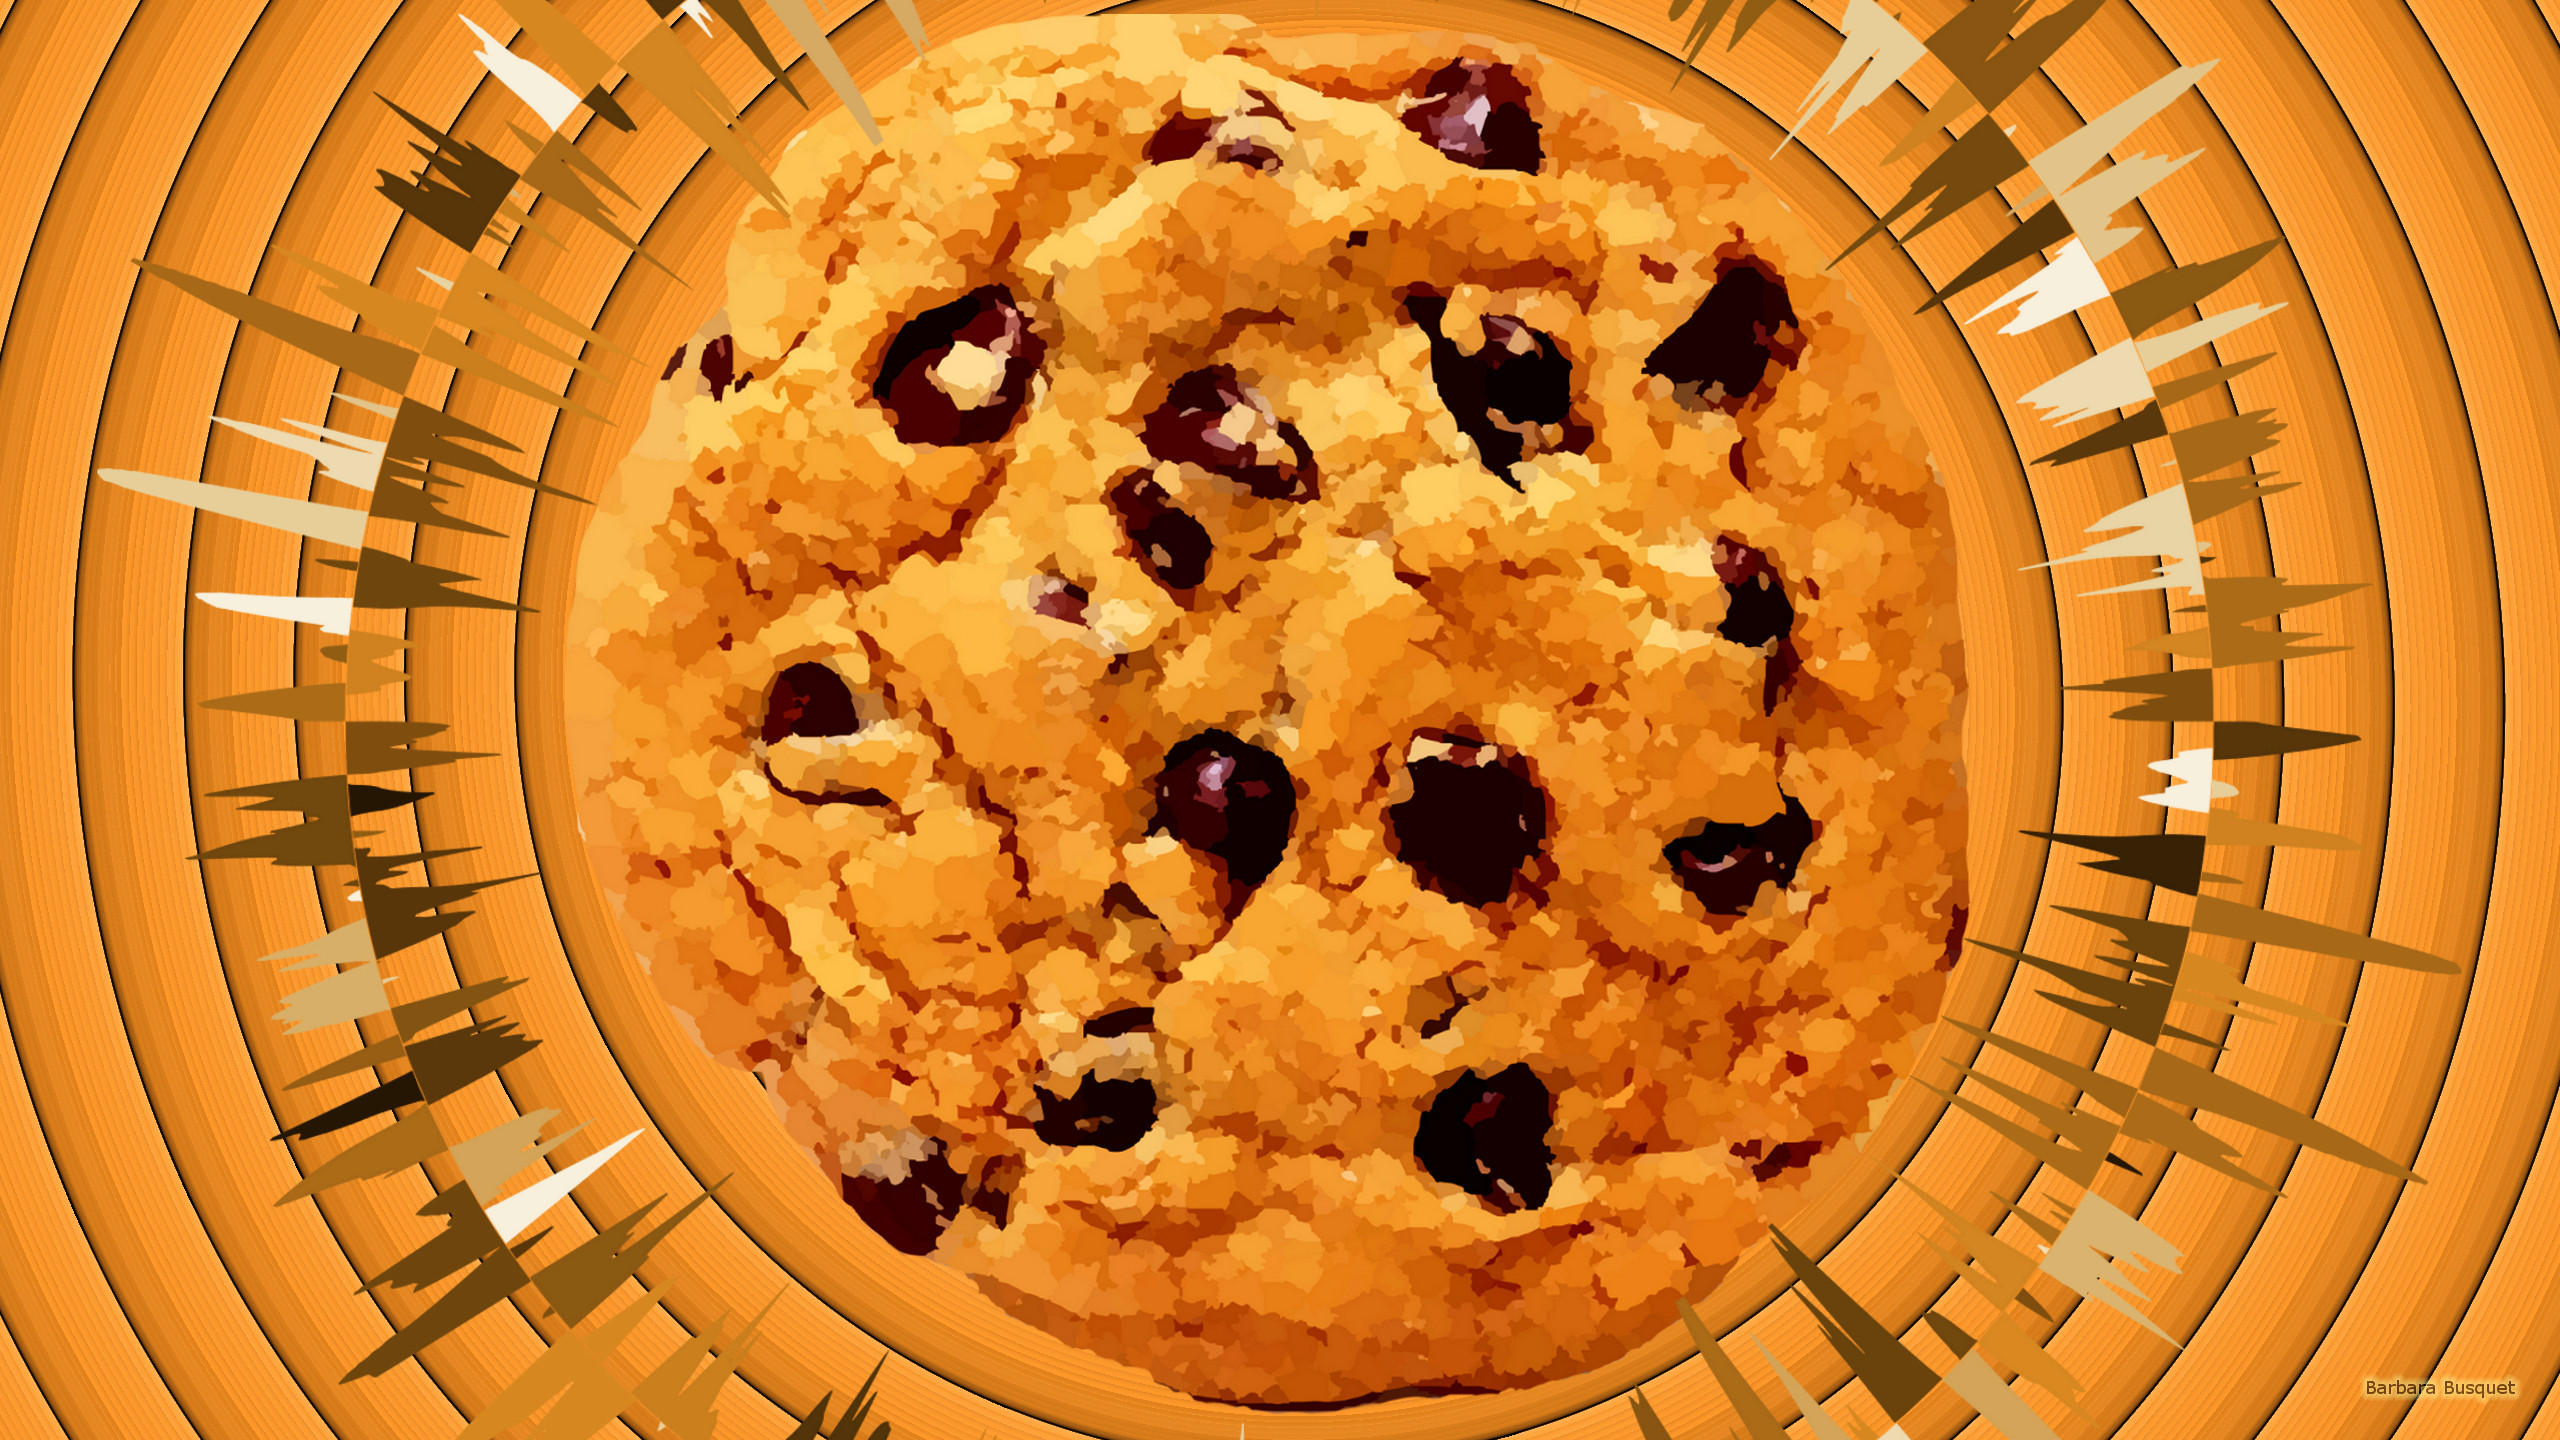 2560x1440 Food wallpaper chocolate chip cookie.